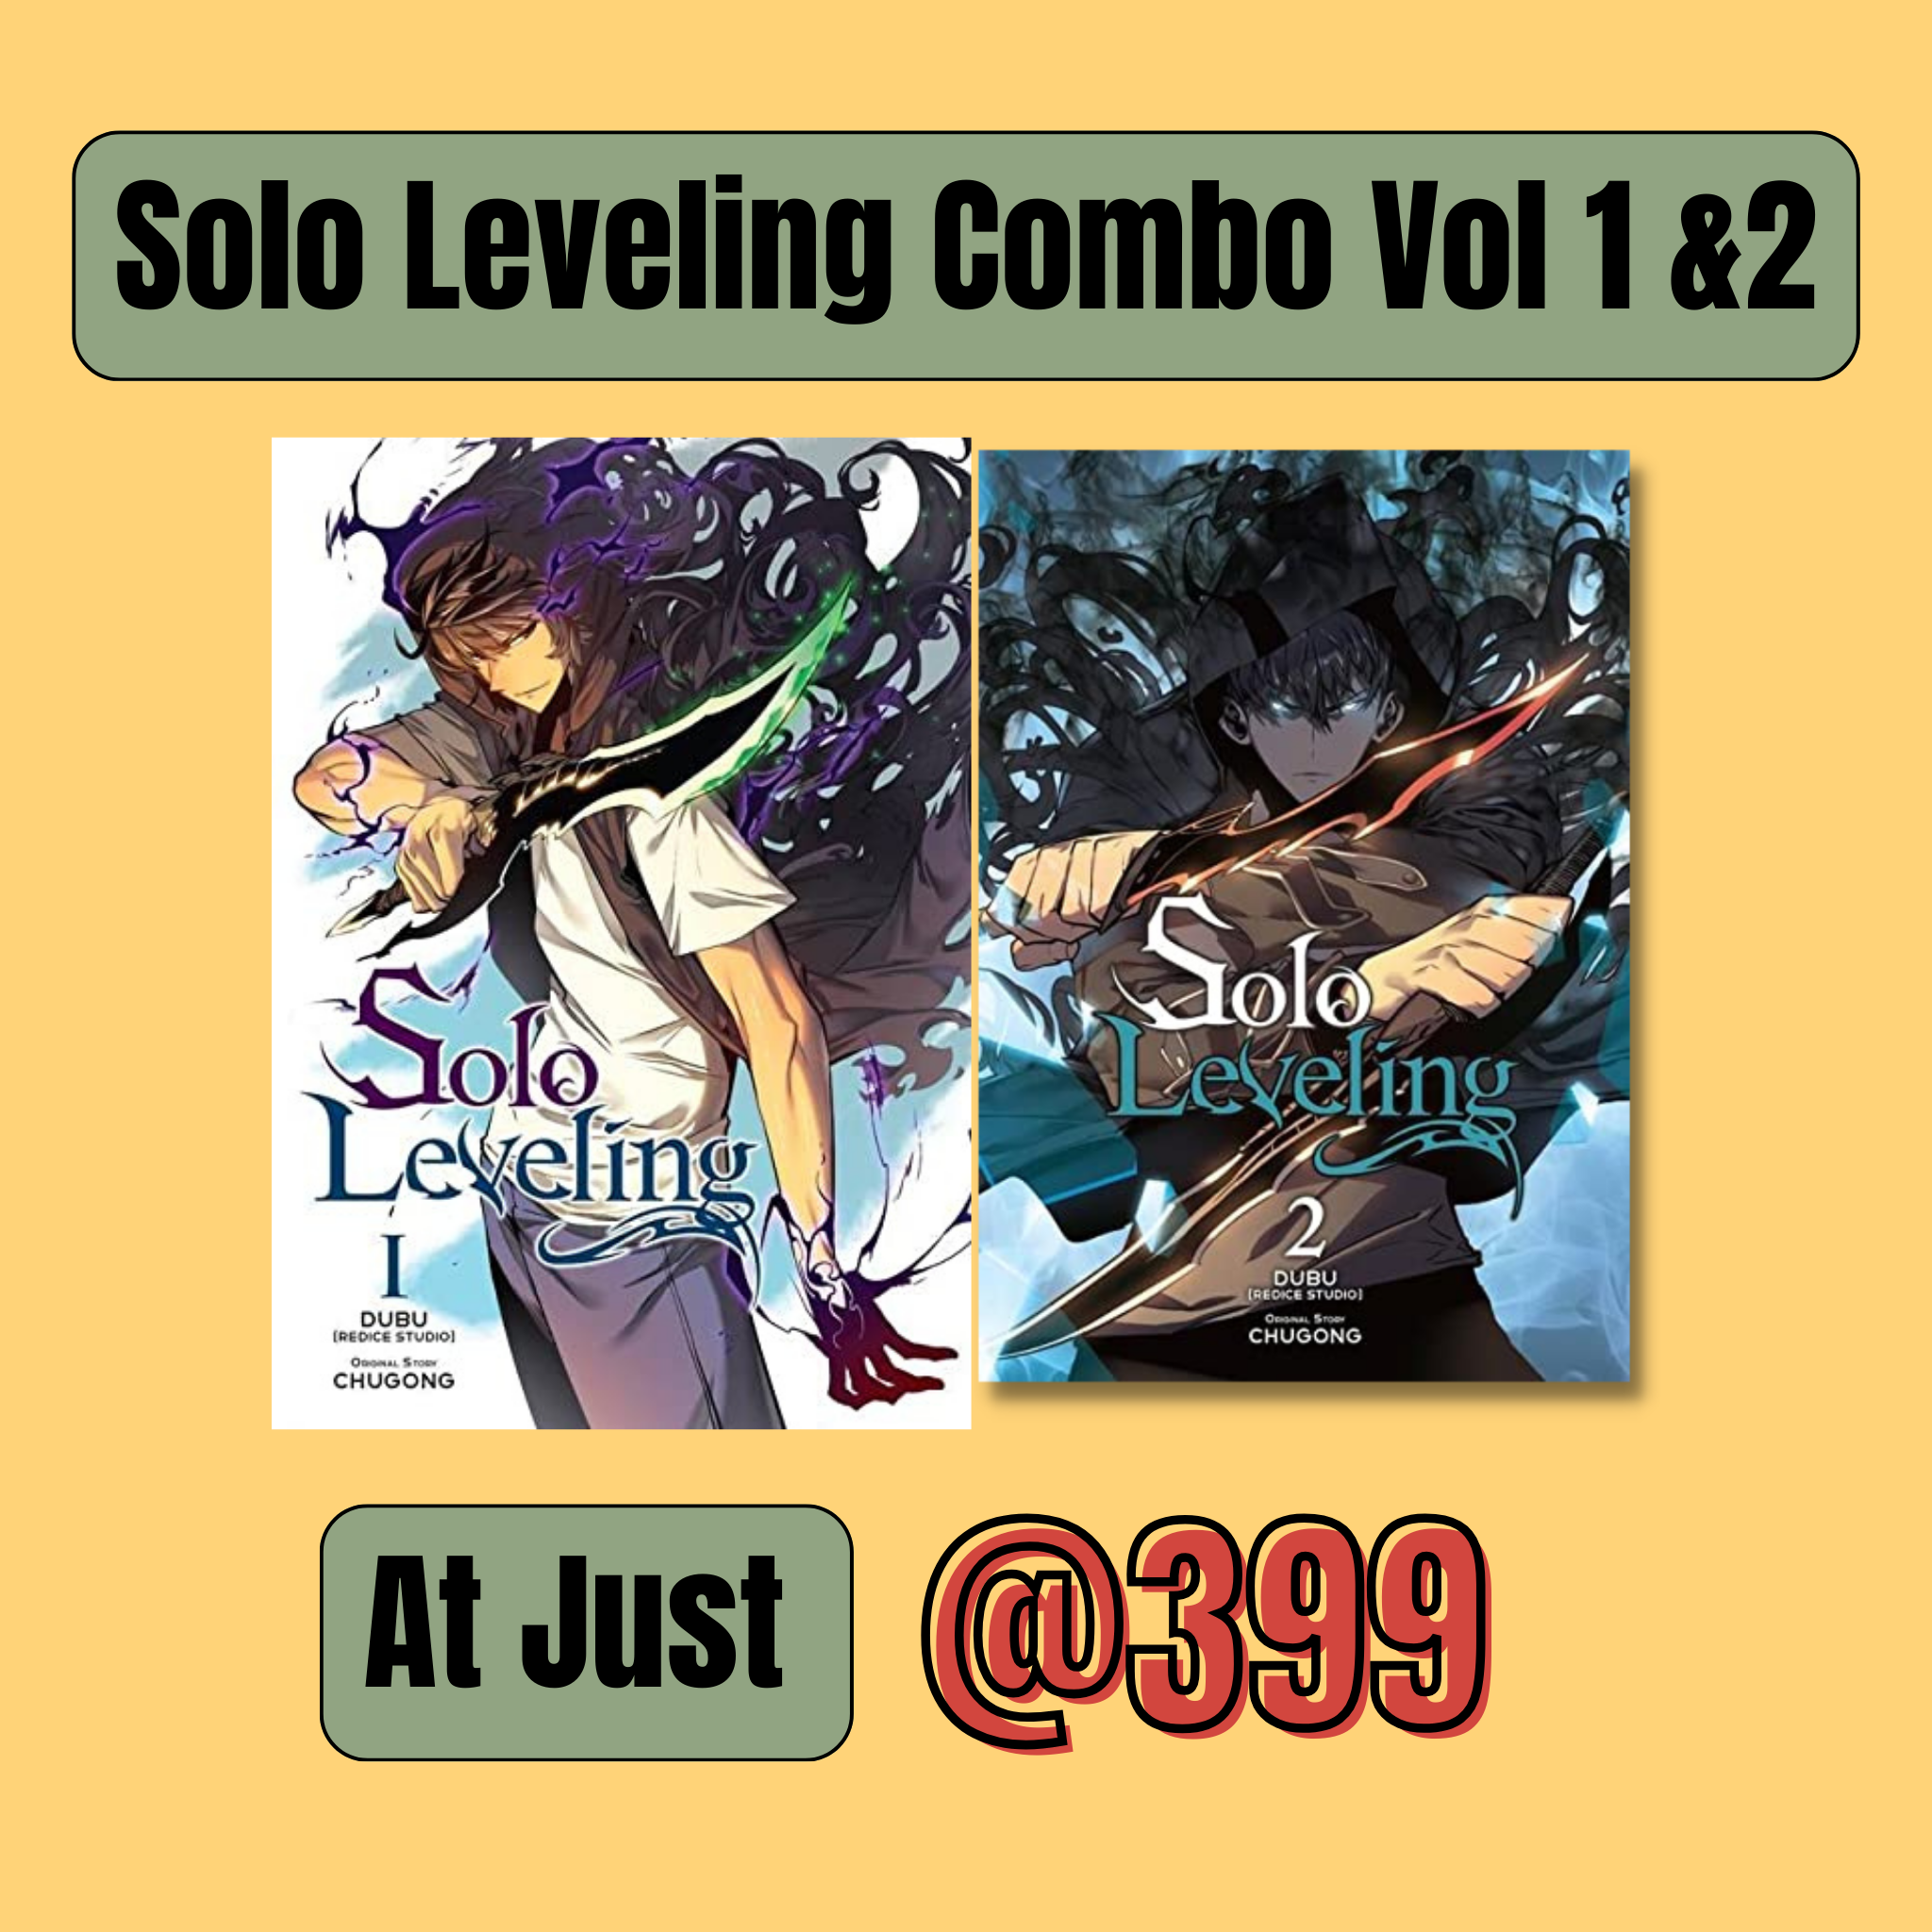 Solo Leveling Combo: Vol 1 & 2 by Chugong (Black and White